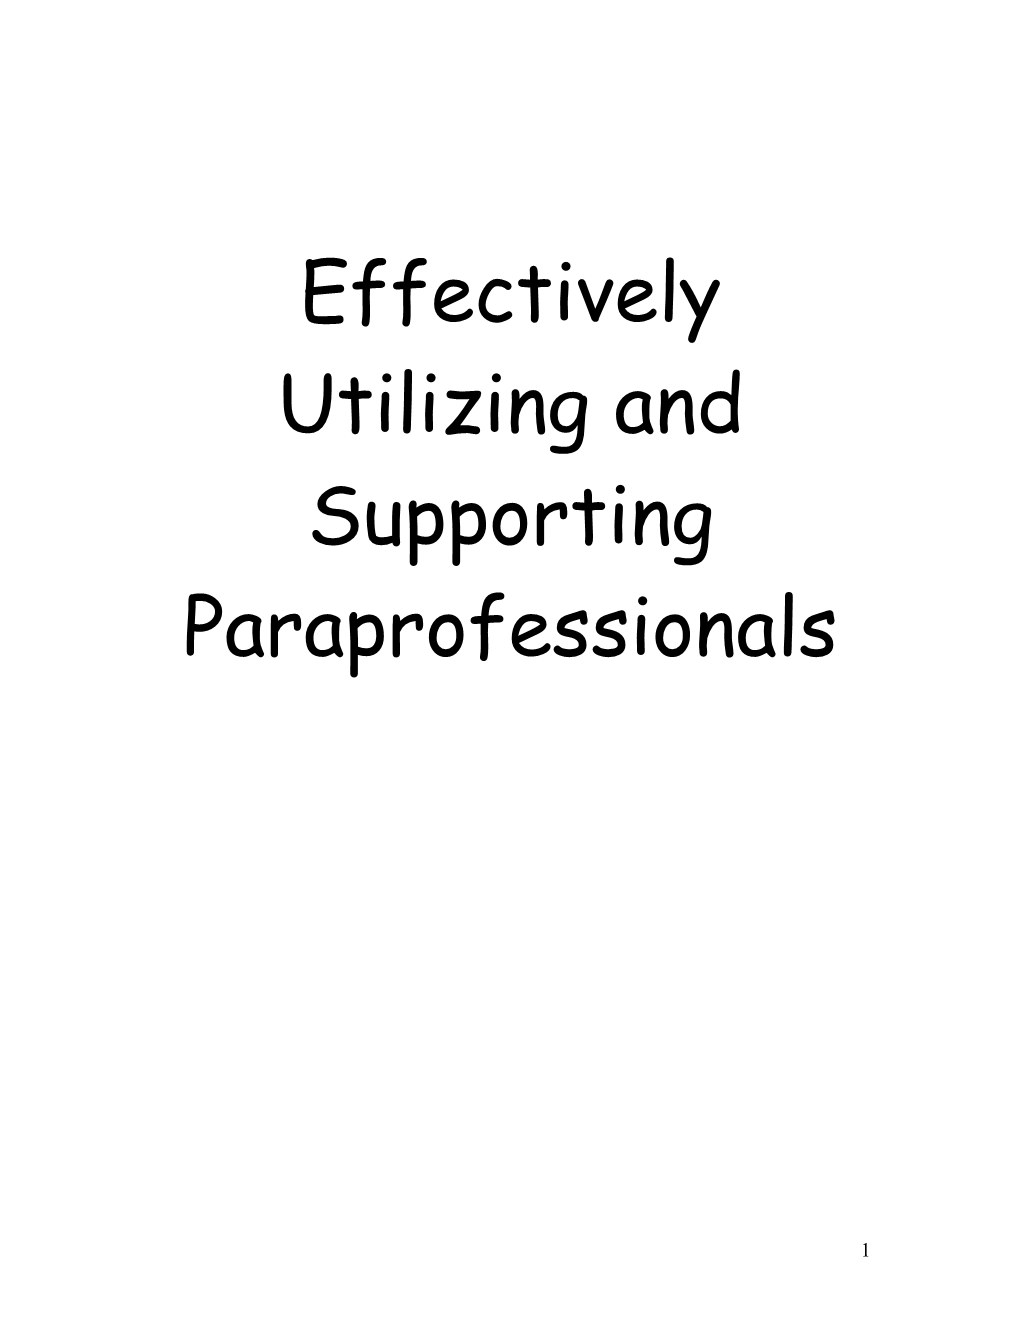 Effectively Utilizing and Supporting Paraprofessionals